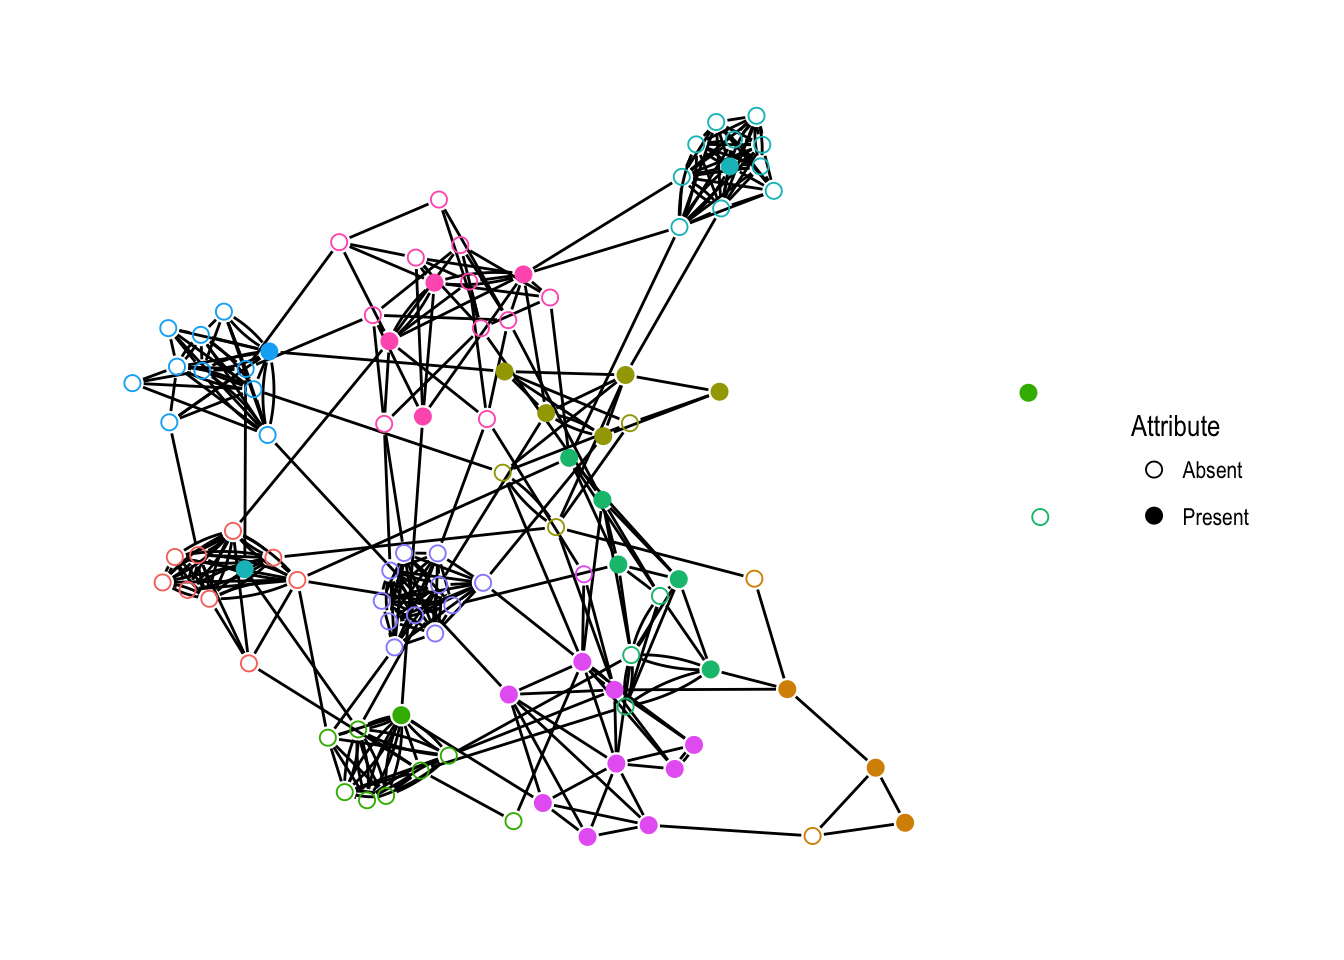 A simulated network with 100 vertices, colored according to neighborhood. The vertex fill indicates the presence or absence of the simulated attribute.